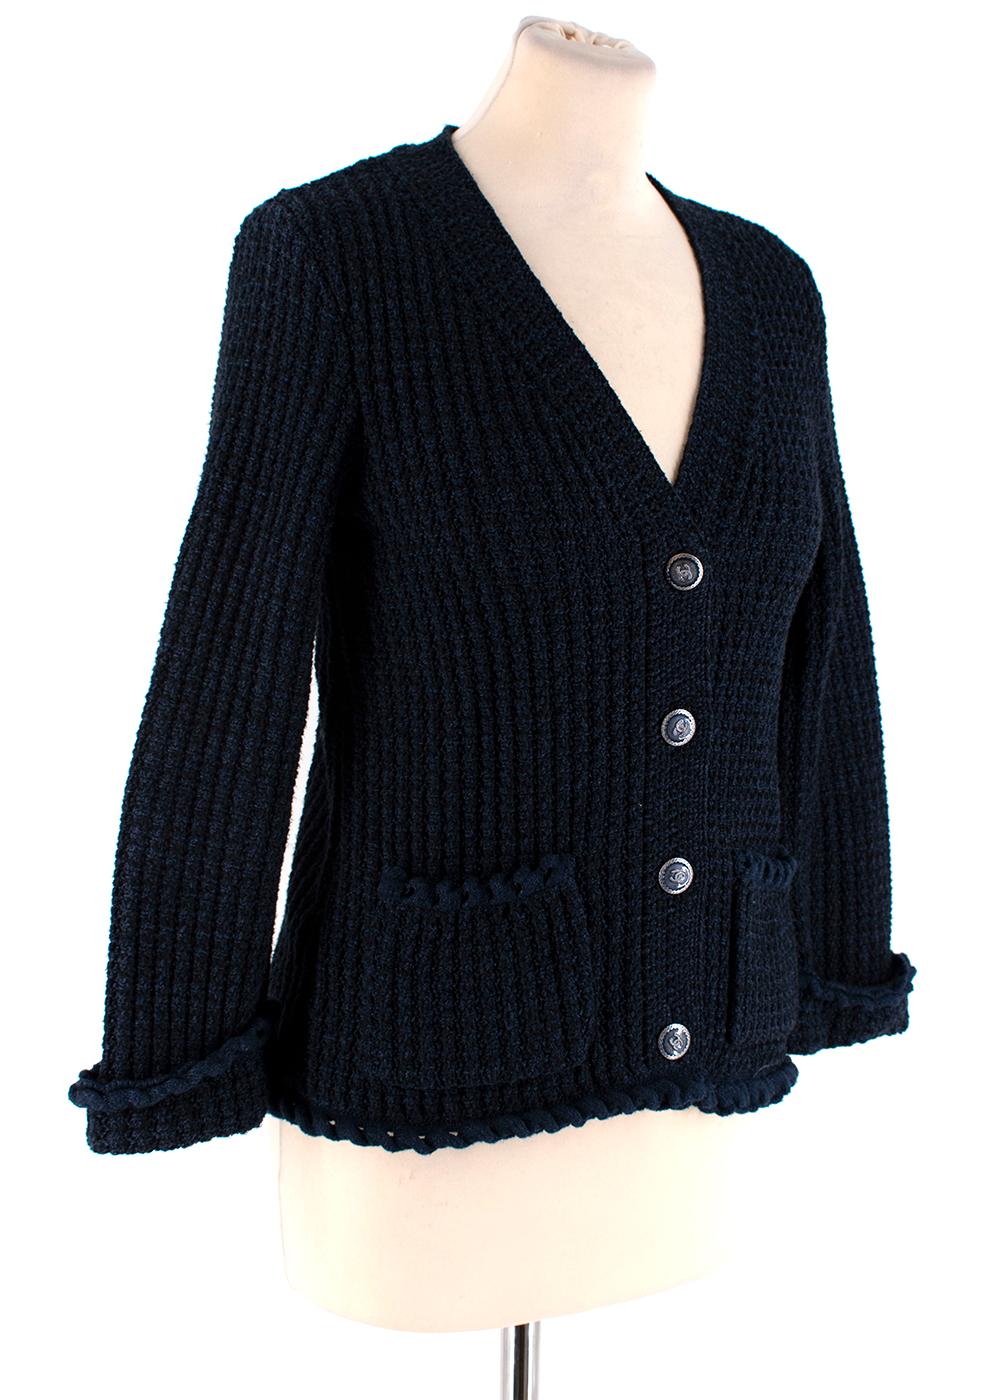 Chanel Blue Tweed Ruffled Button Down Cardigan 

- Classic Chanel tweed design 
- Thick knitted cardigan 
- Cotton/Silk/Cashmere blend 
- CC embossed silver coated buttons 
- Front patch pockets
- Ruffled sleeves and pocket trims

Materials: 
62%